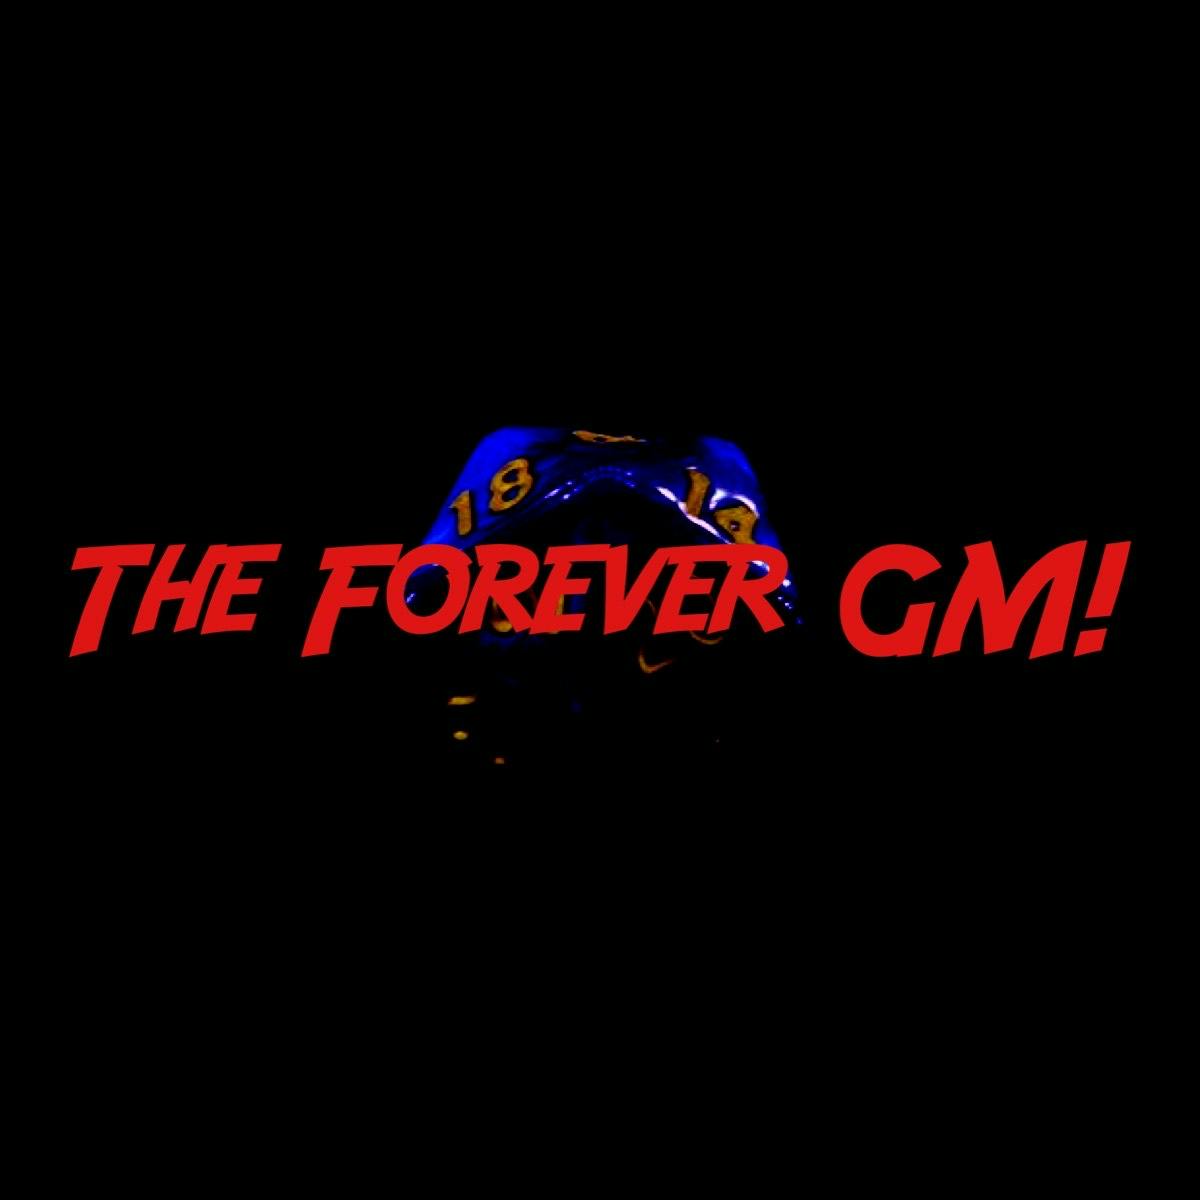 The Forever GM!